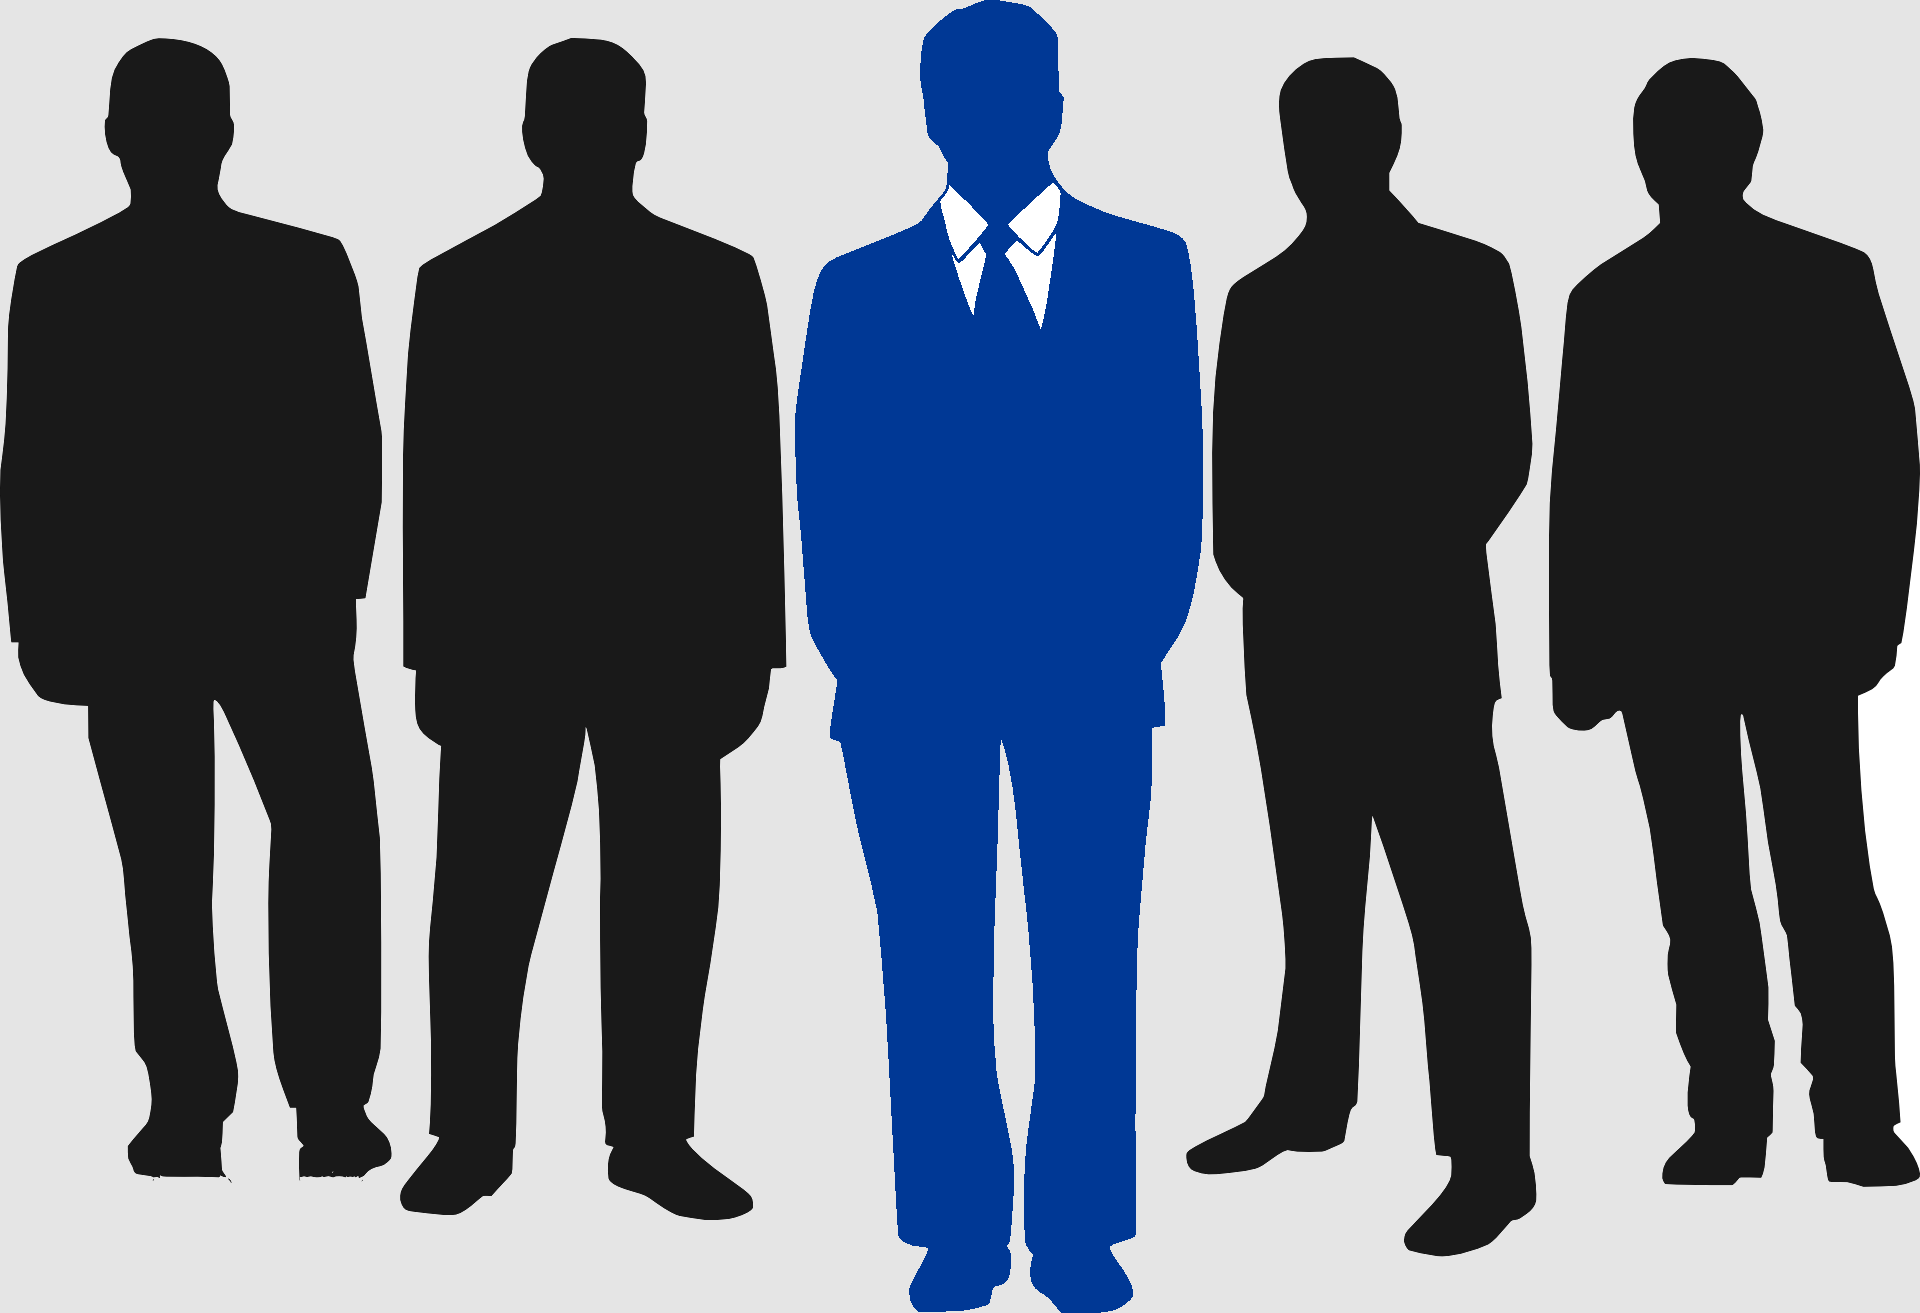 Silhouettes of 5 people, with the 2 on each side in black, and the center silhouette in more detail and in blue.